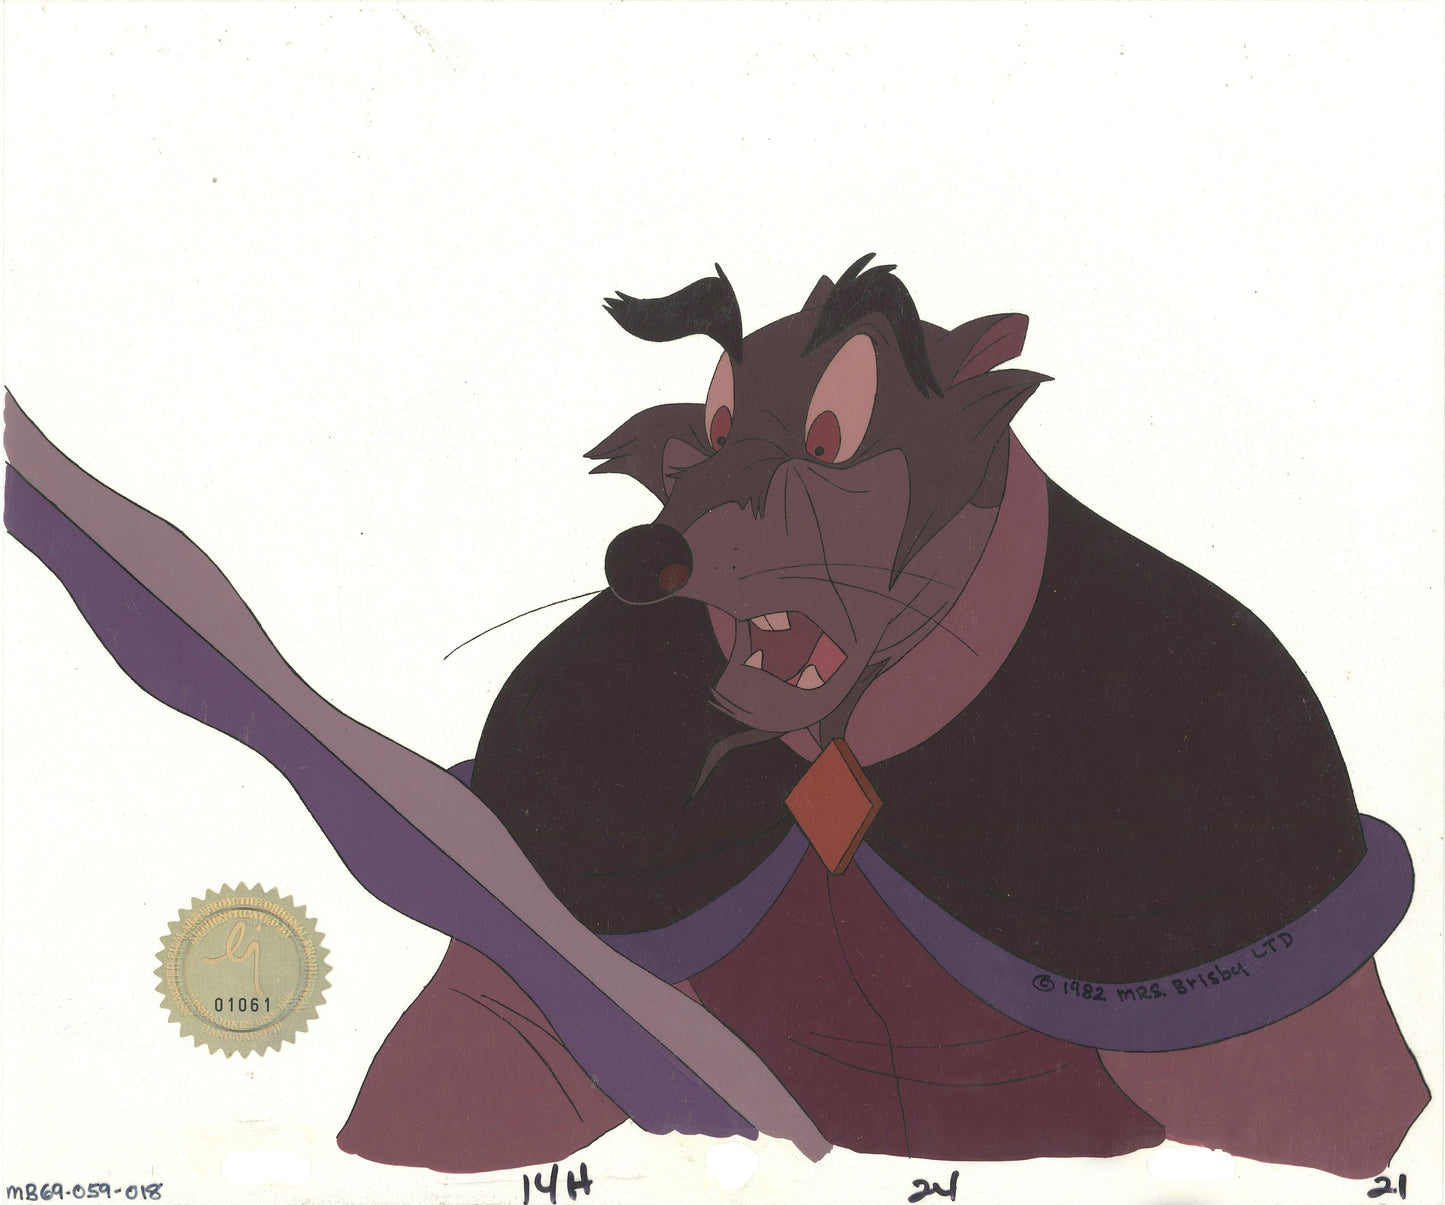 Don Bluth Secret of NIMH Jenner 1982 Original Production Animation Cel Used to make the cartoon 059-018